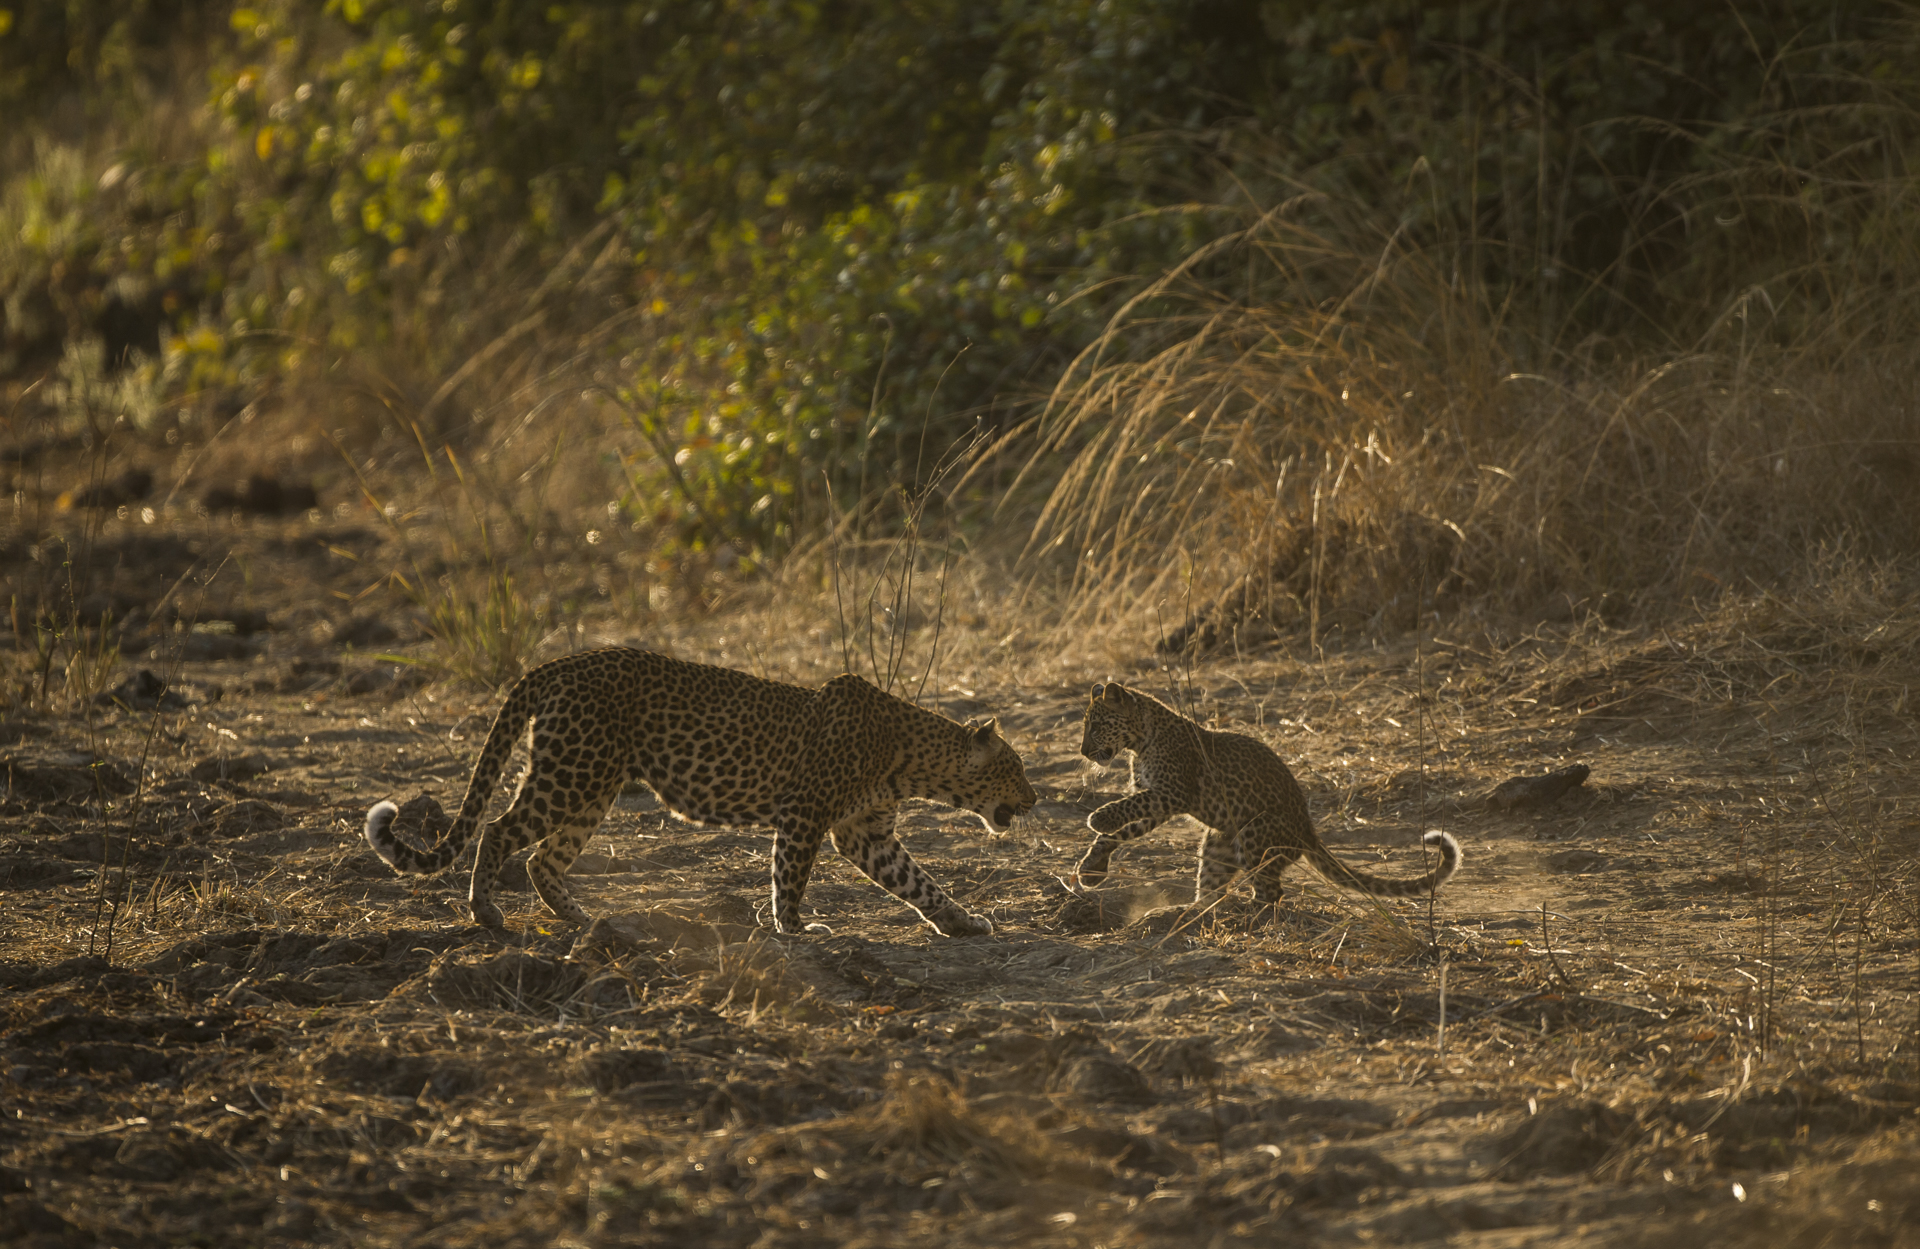  A leopard cub greets its mother after she returns from hunting. 